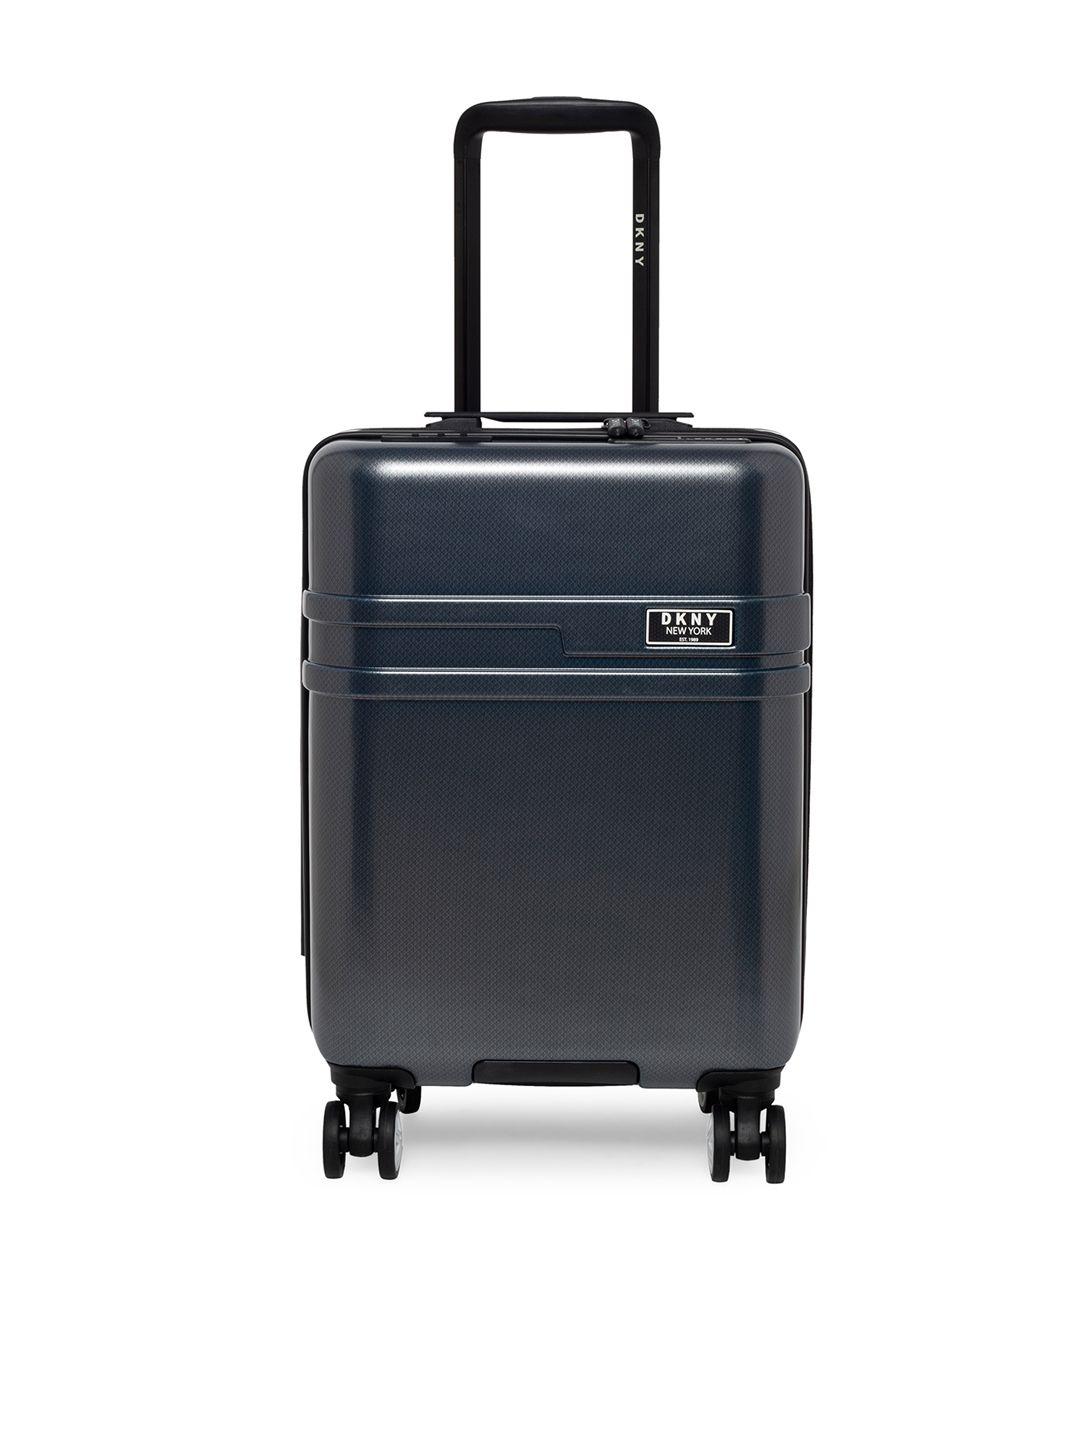 dkny teal blue grey textured dash hard-sided cabin trolley suitcase